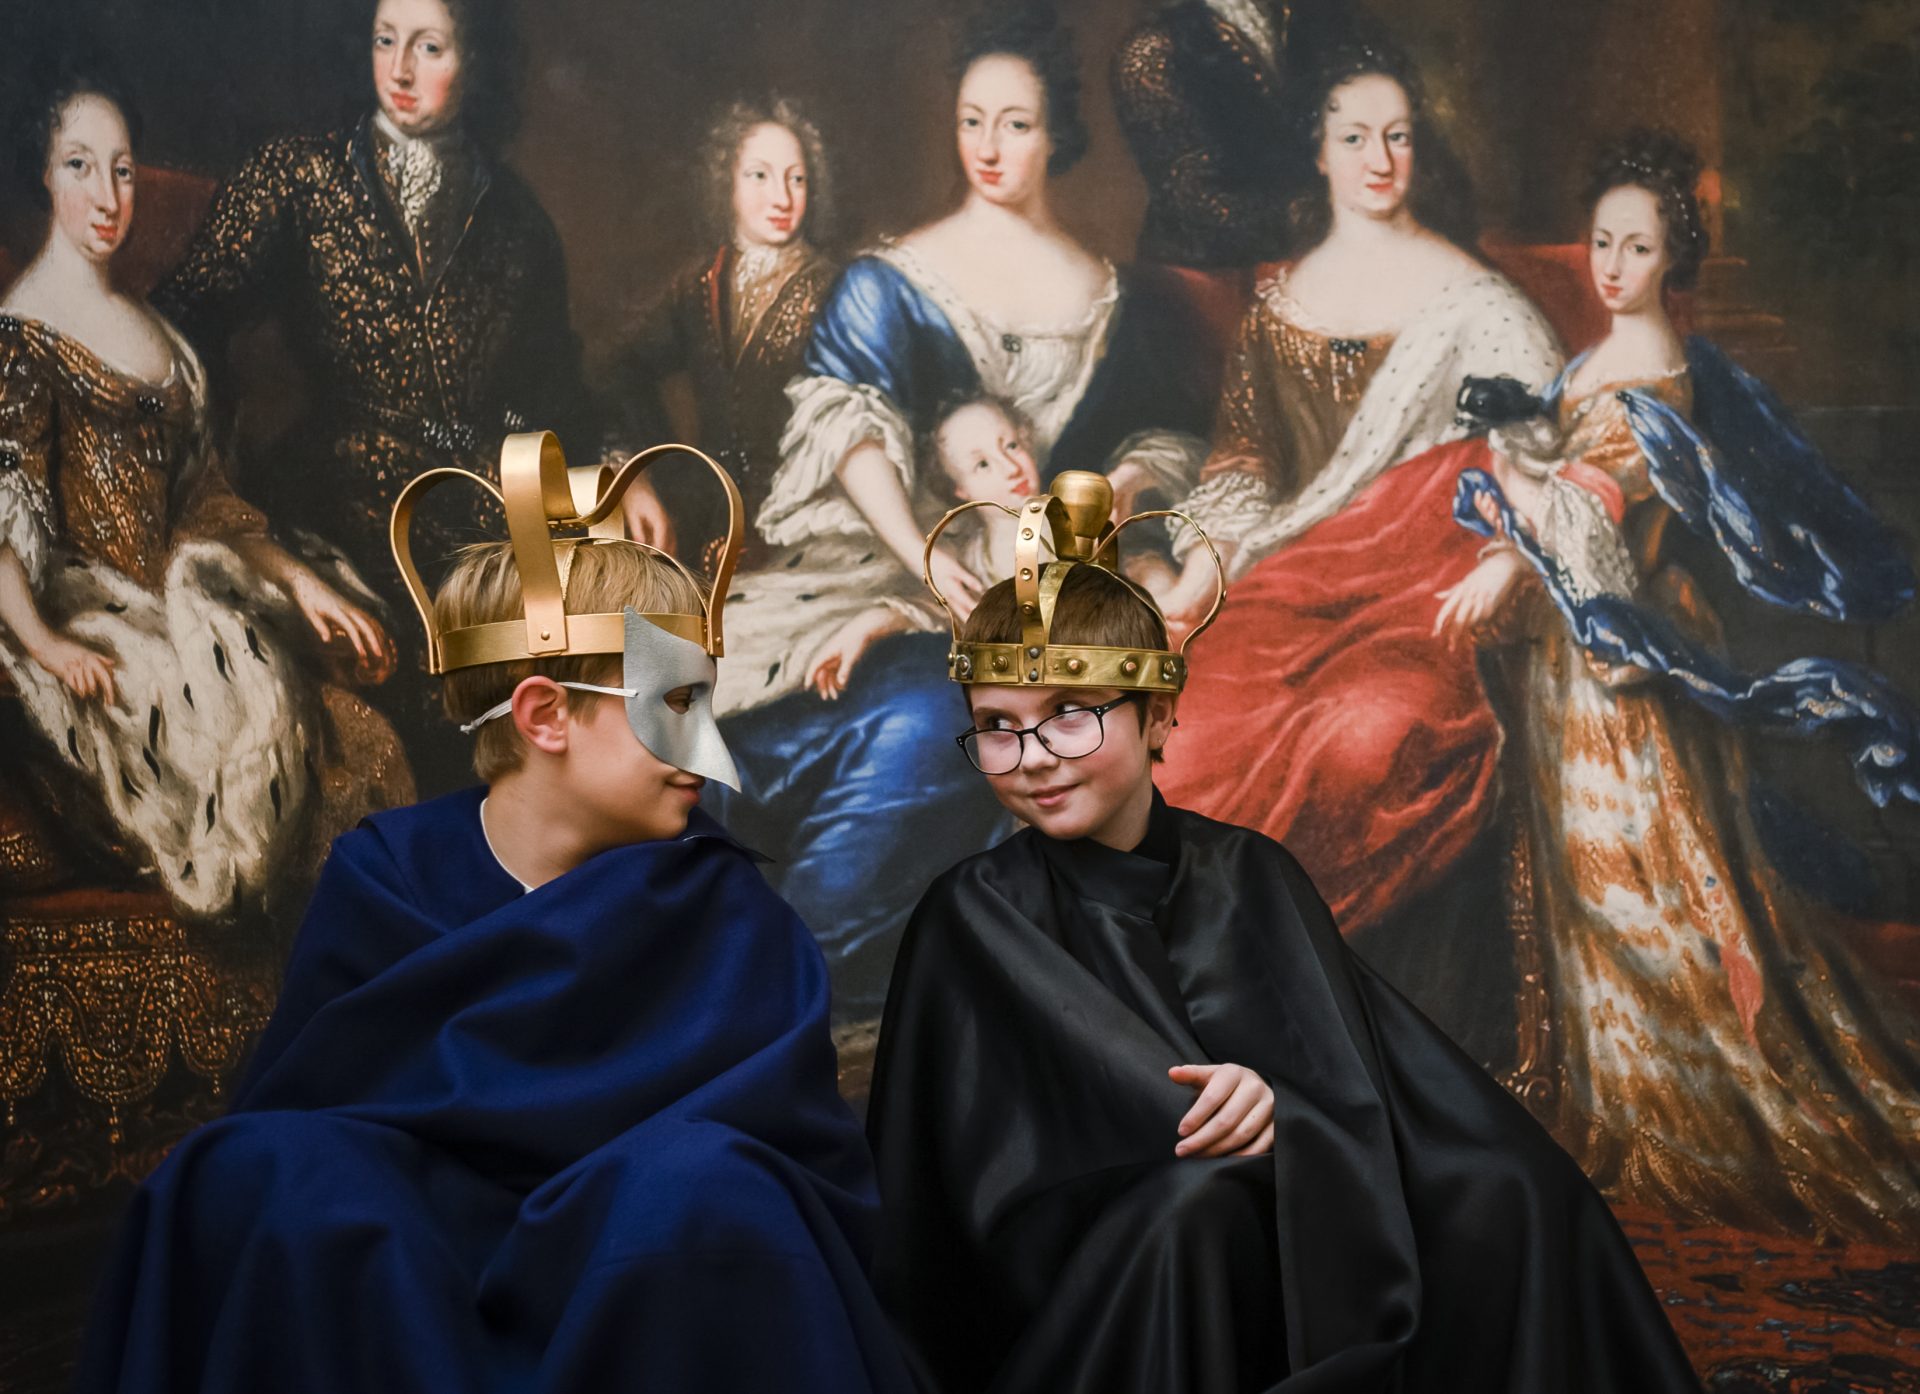 Two children are playing with crowns, masks, and costumes.